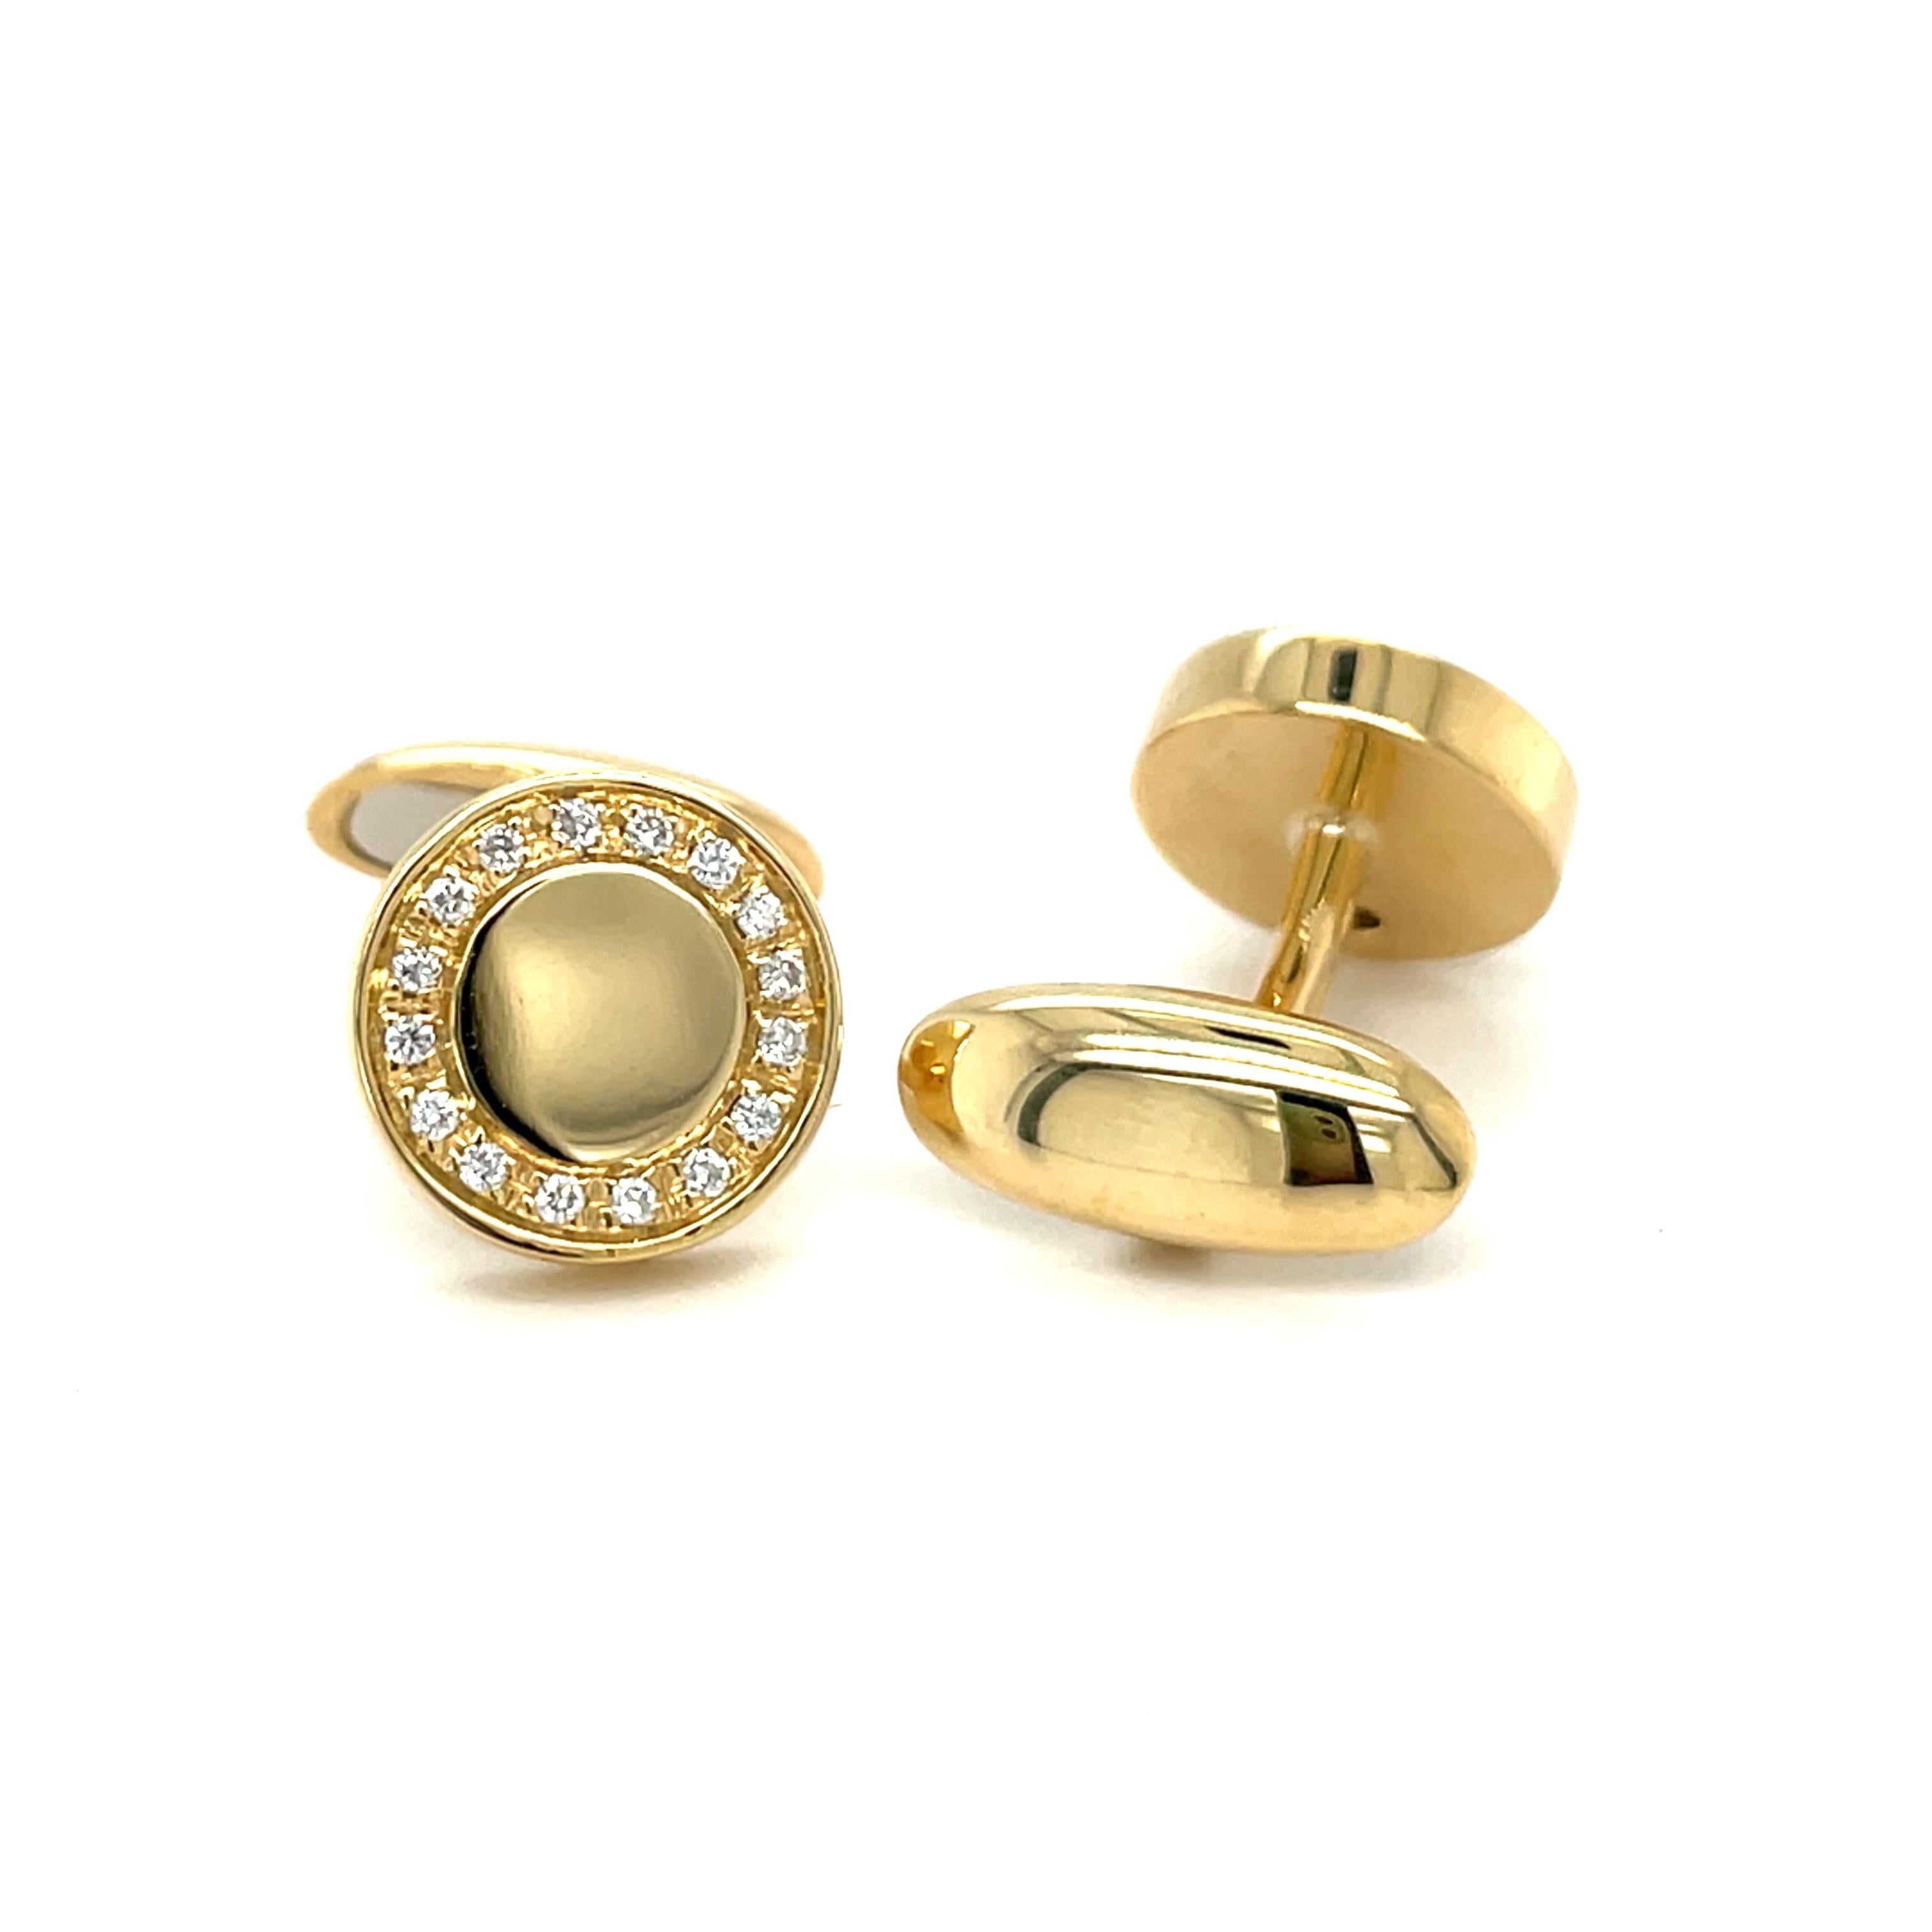 These yelllow gold cufflinks are from Men's Collection. These cufflinks are decorated with diamonds G color VS2 clarity. The total amount of diamonds is 0.28 Carat. The dimensions of the cufflinks are 1.2cm. These cufflinks are a perfect upgrade to